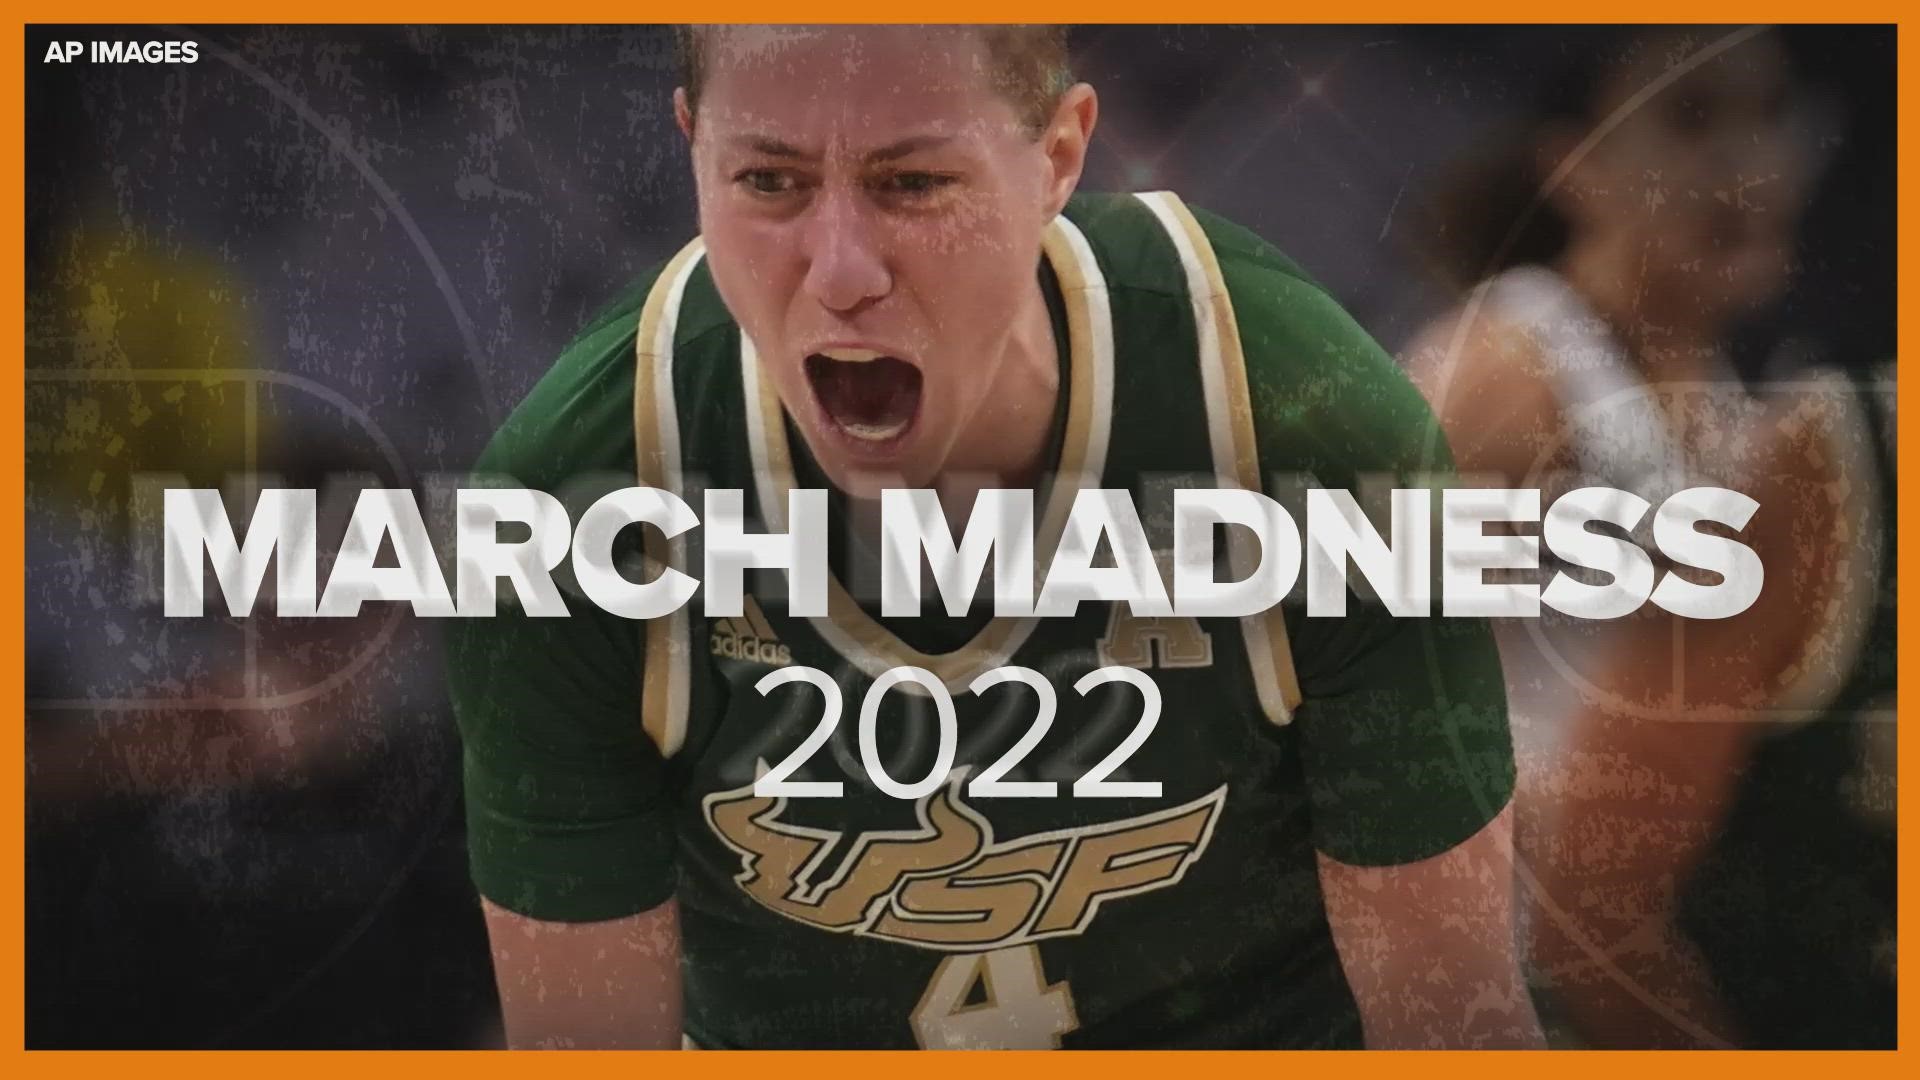 March Madness 2022: Fun facts for tournament | wusa9.com